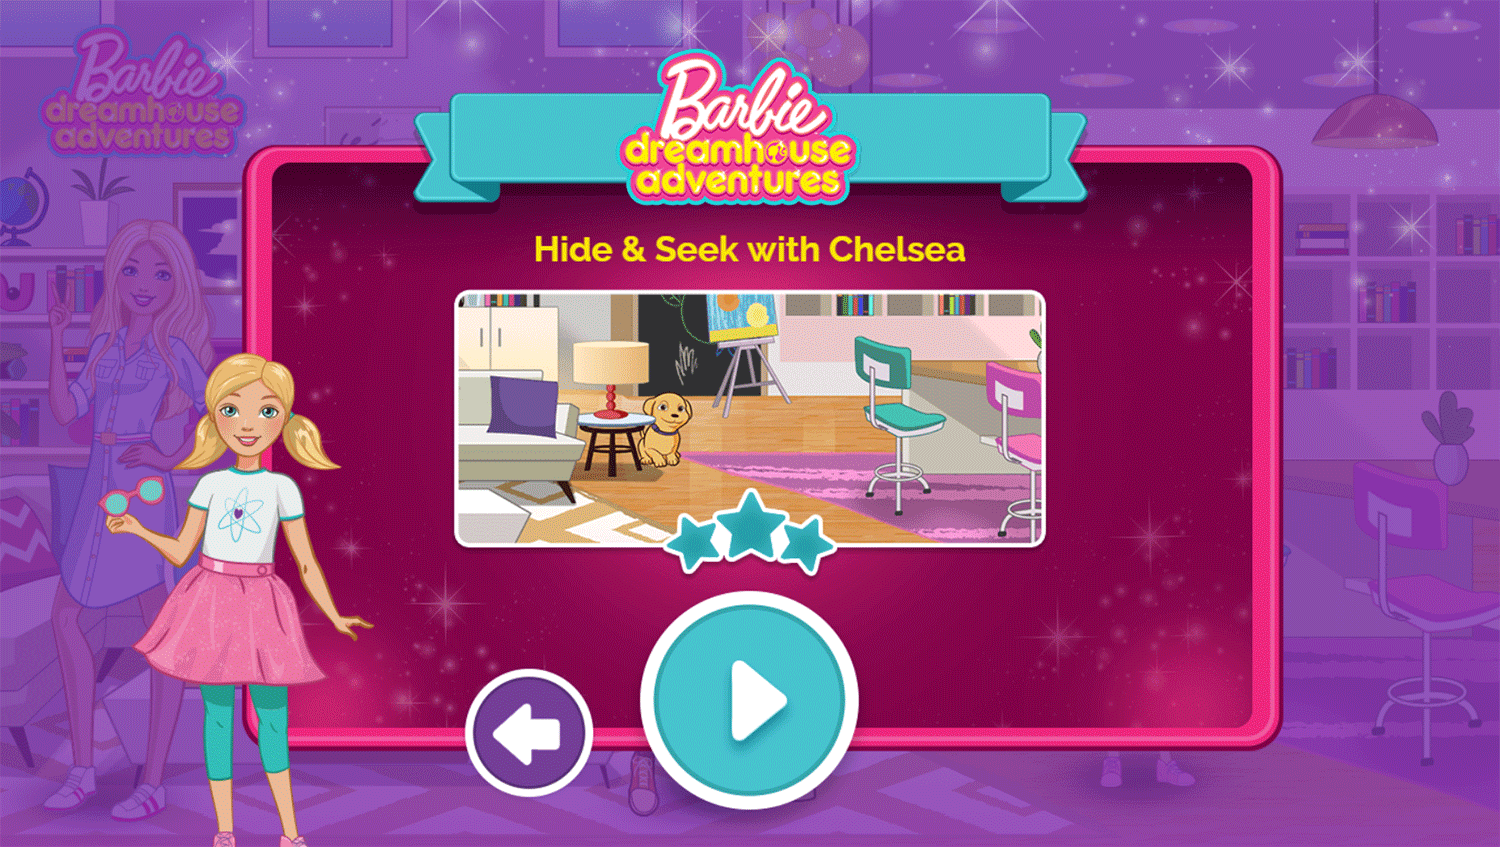 Barbie Dreamhouse Adventure Hide and Seek with Chelsea Game Welcome Screenshot.